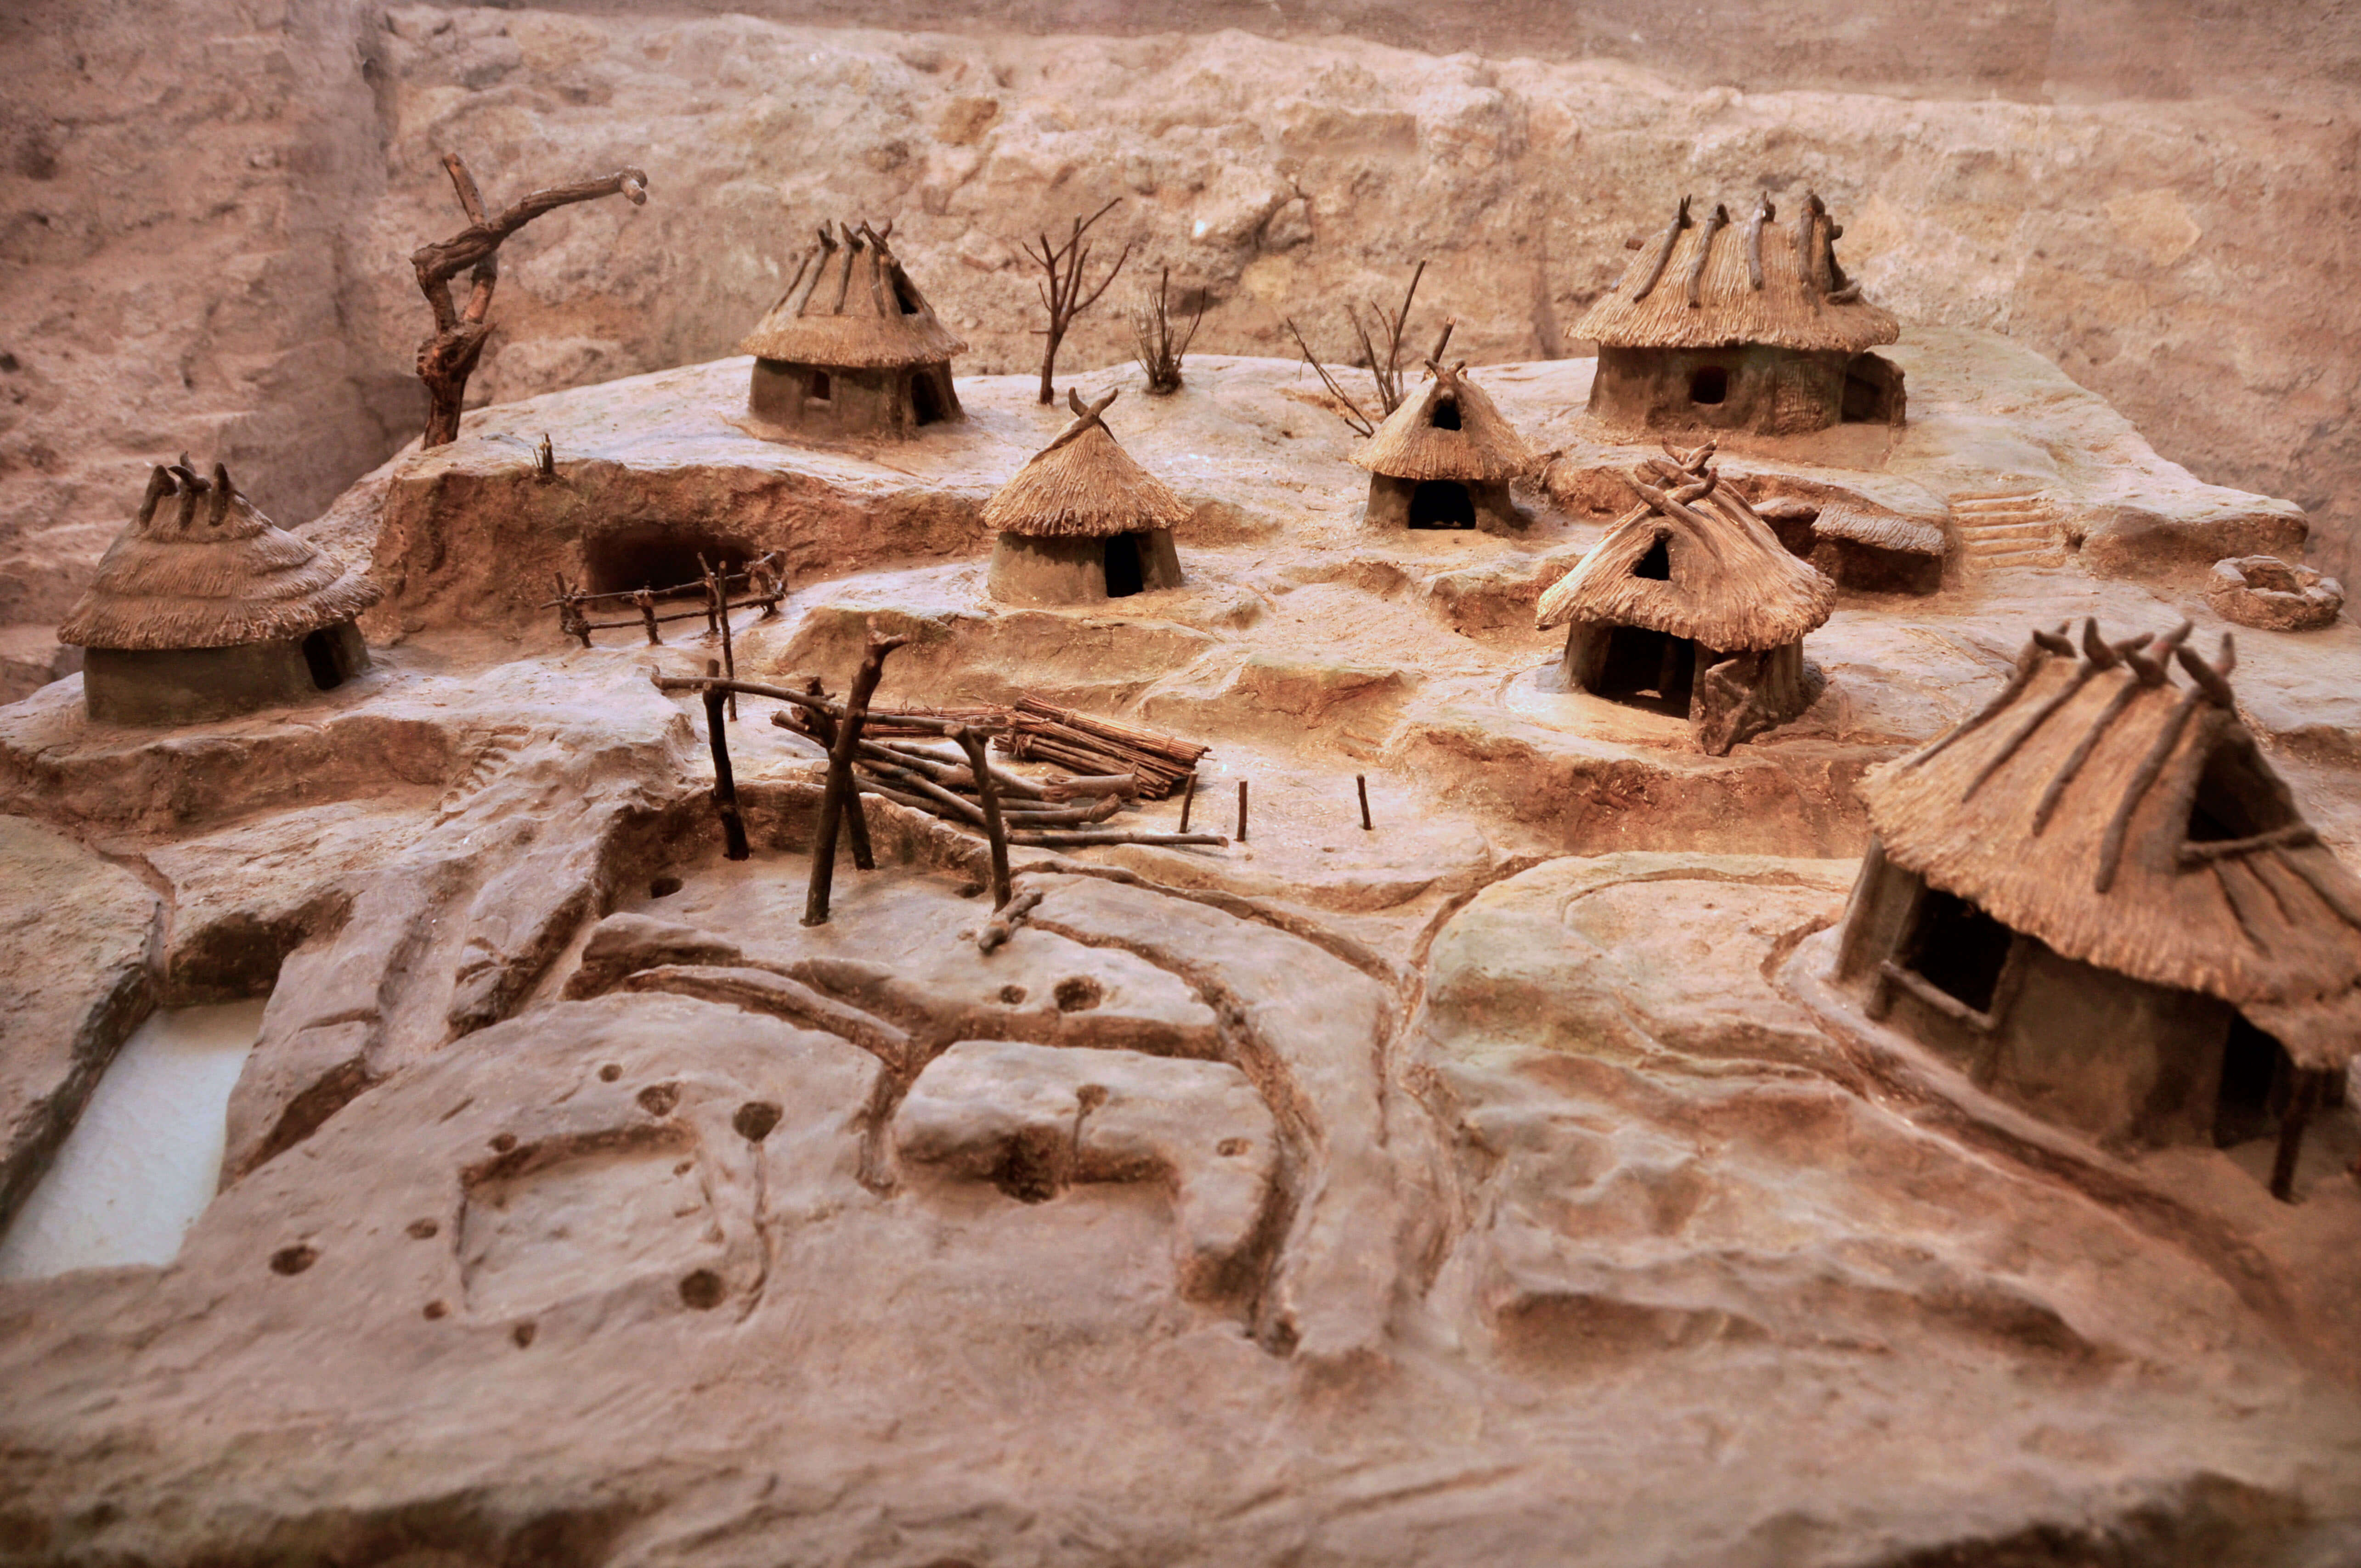 A small model which shows various wooden huts with muddy paths going between them.